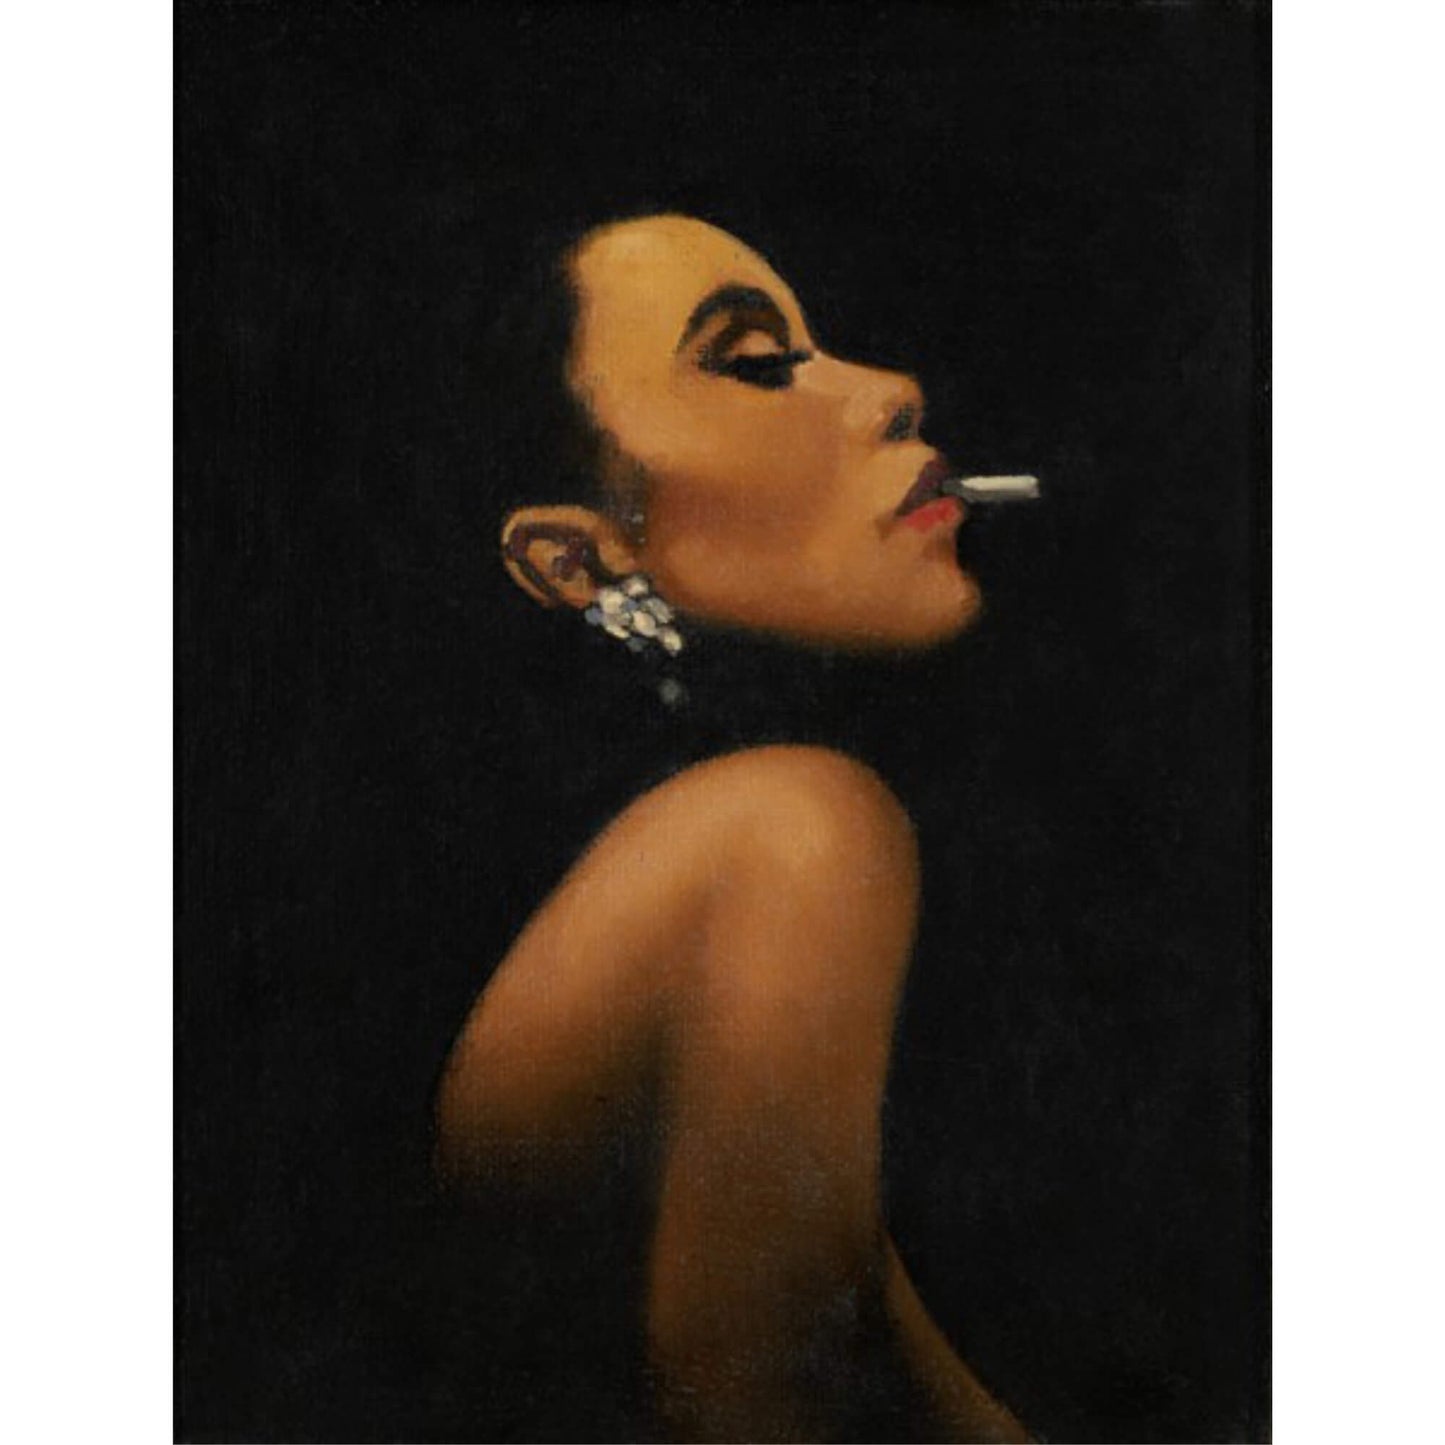 Load image into Gallery viewer, Showgirl  Mini Limited Edition Print Jack Vettriano
